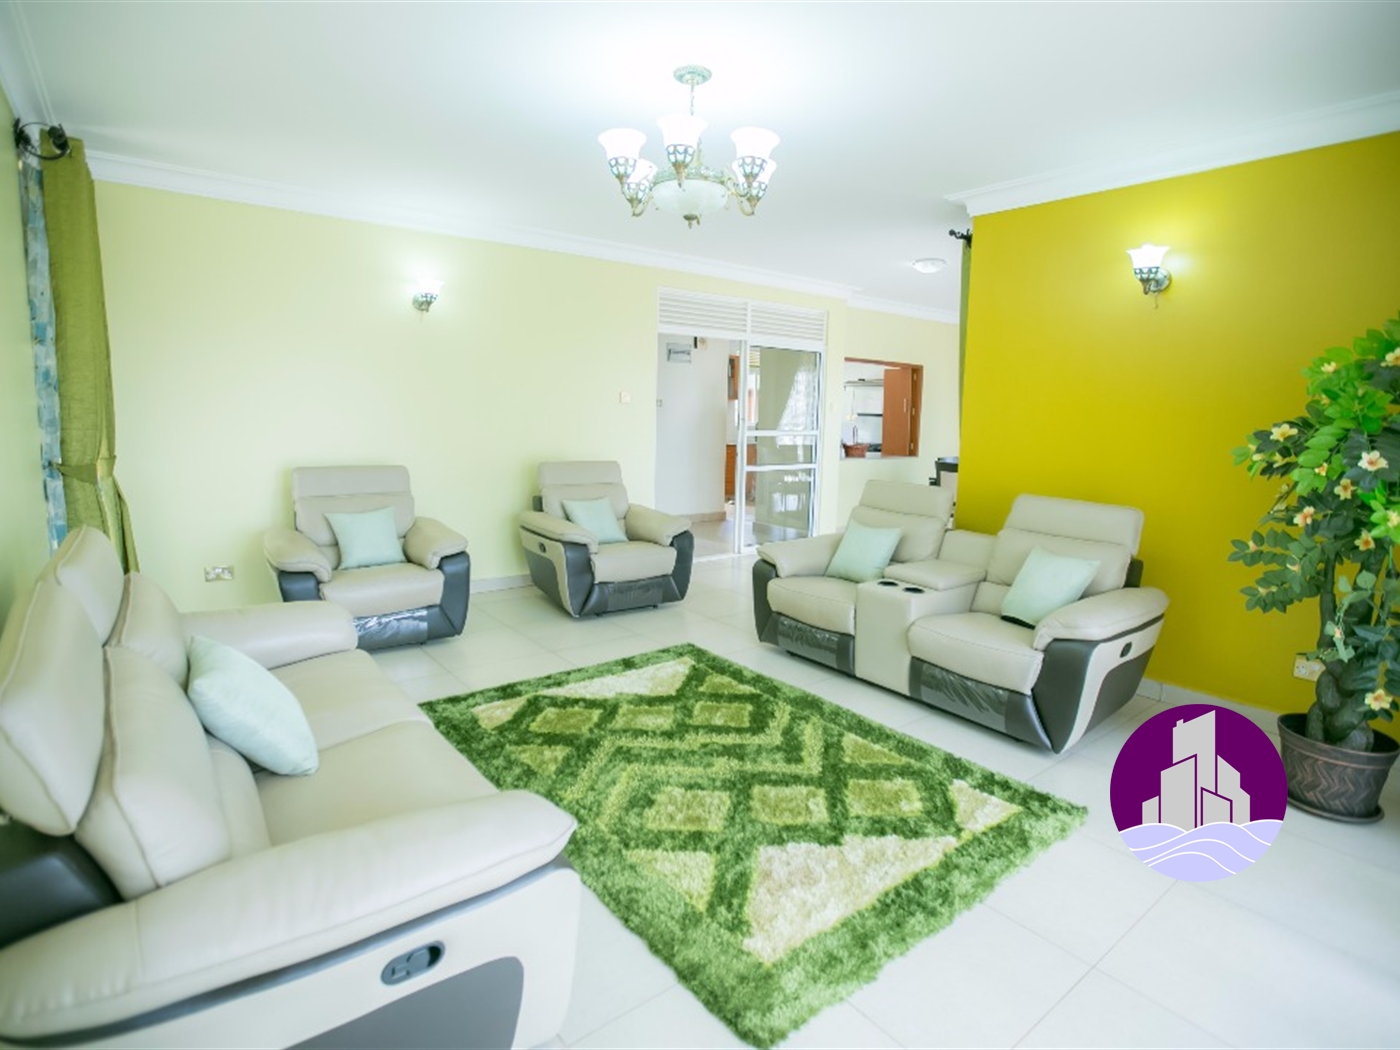 Mansion for rent in Lubowa Kampala